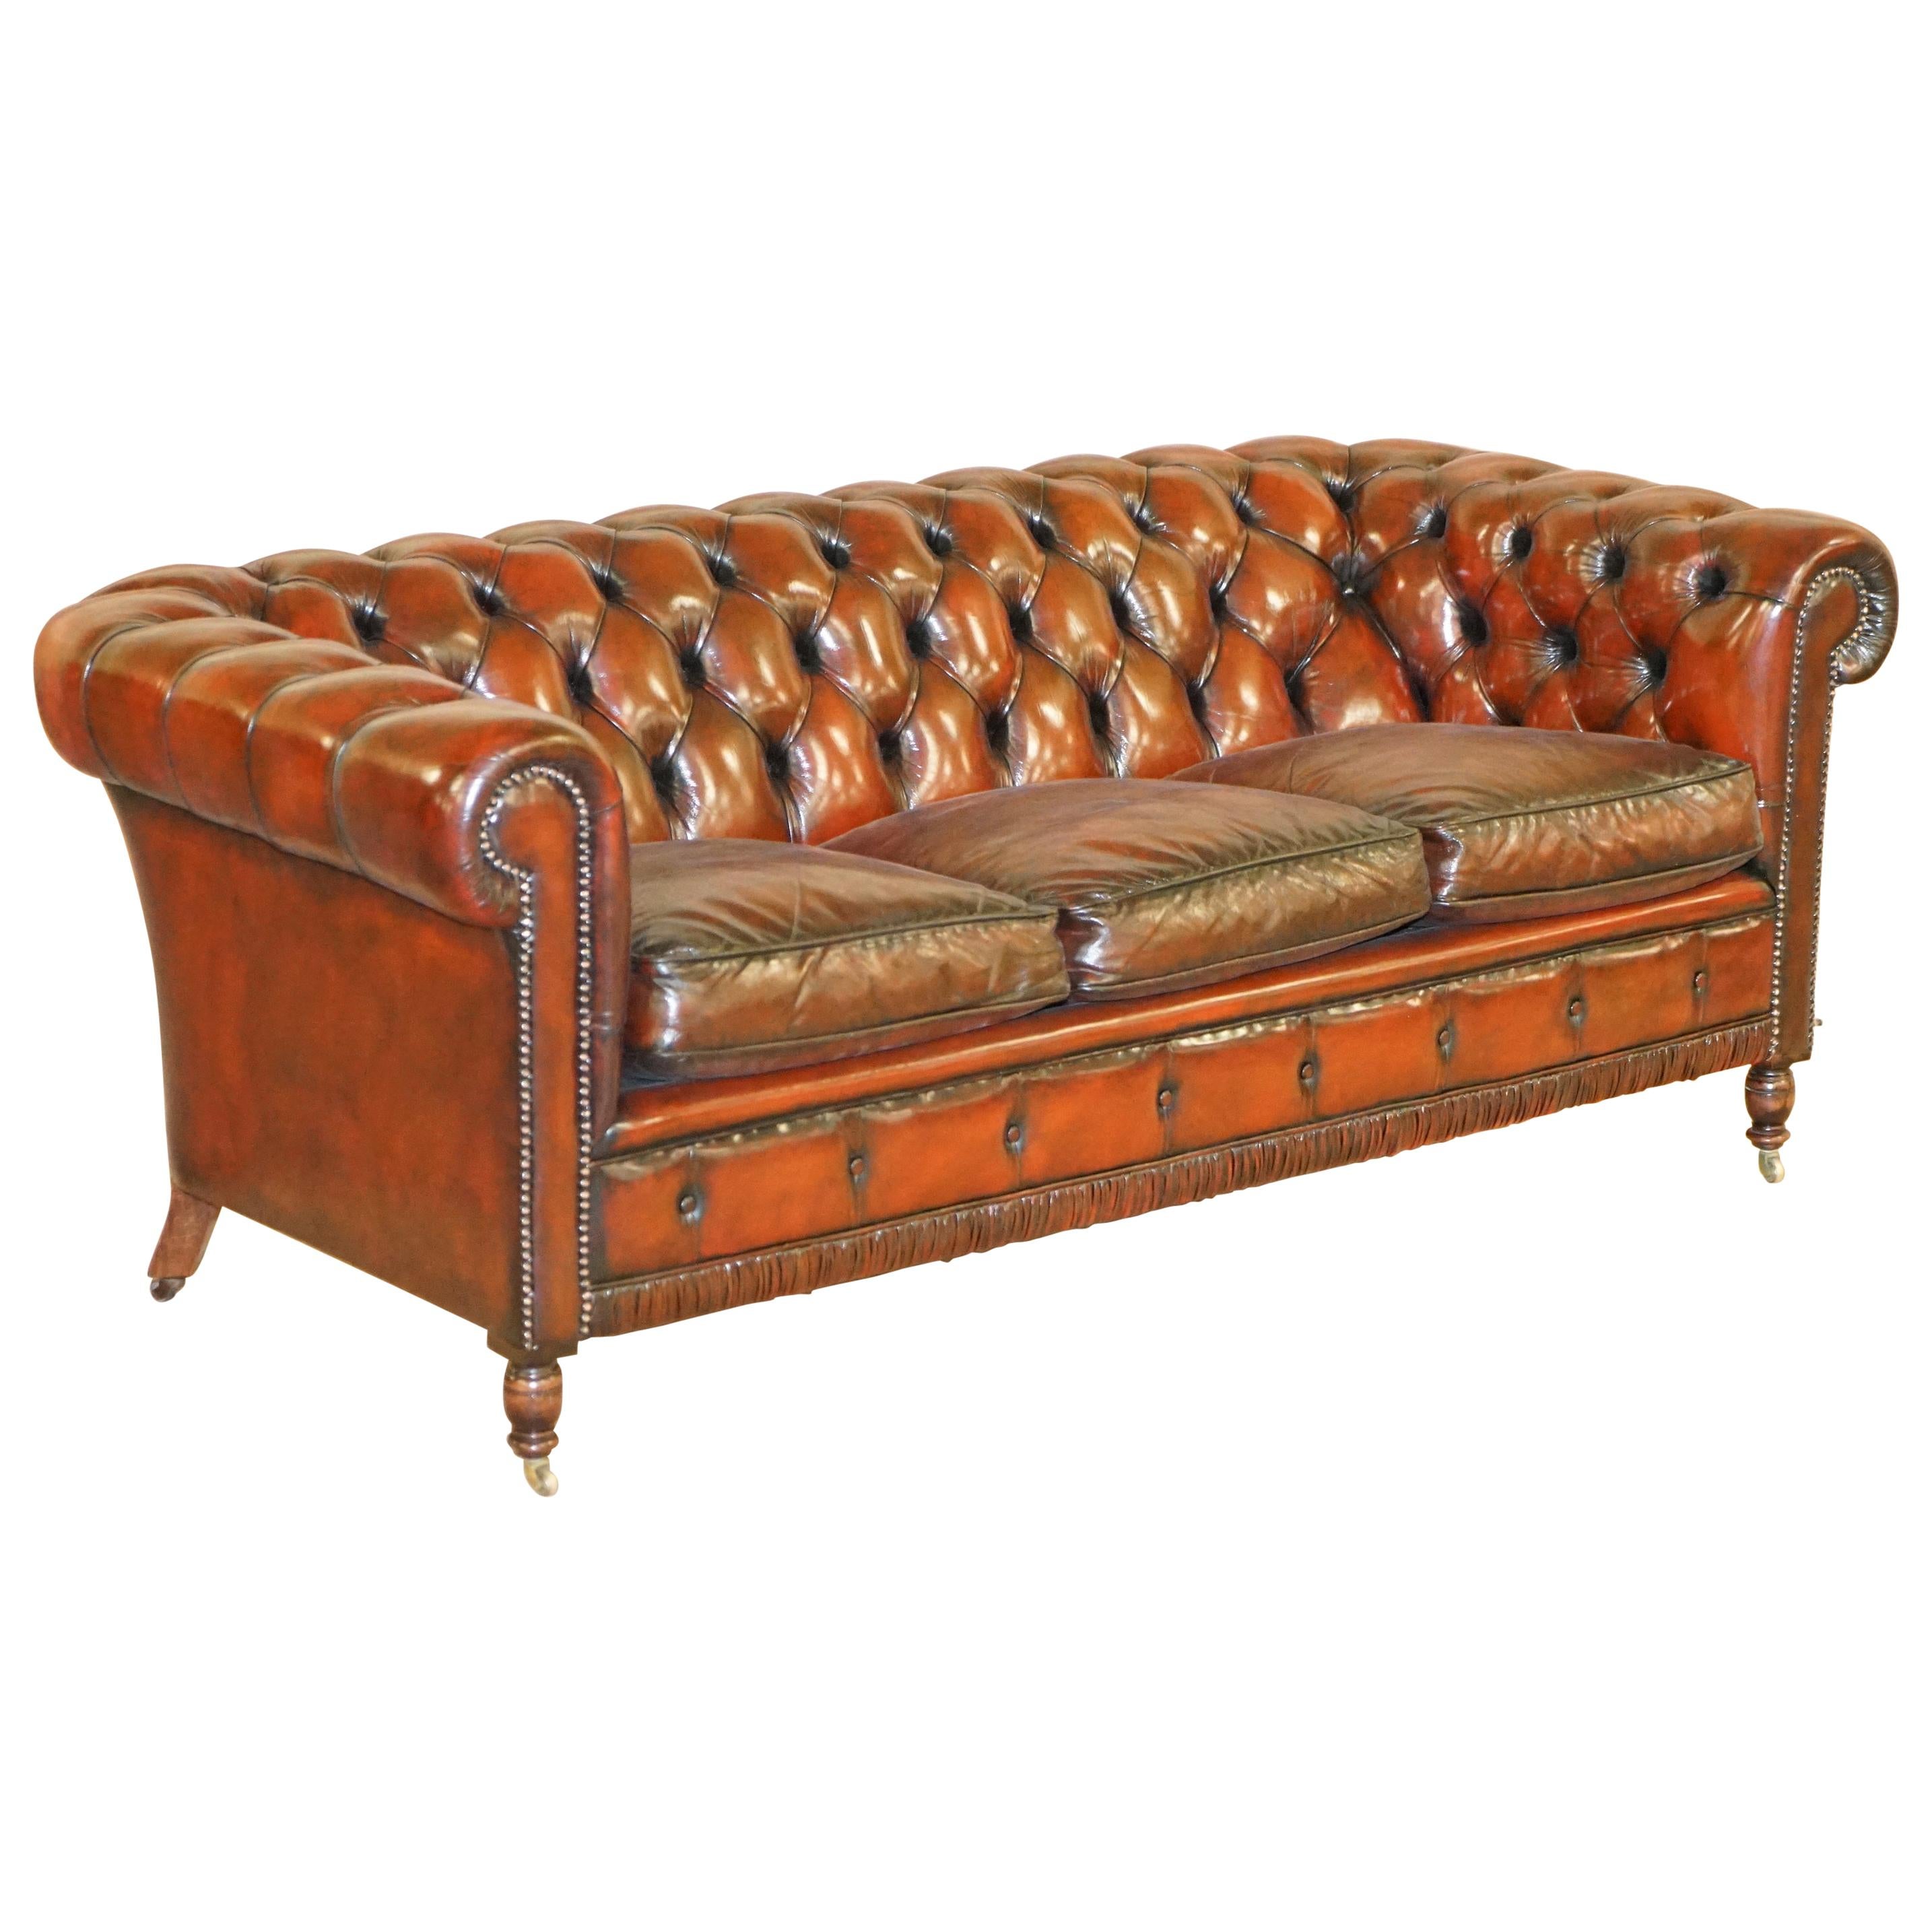 Restored Vintage Oxblood Bordeaux Leather Chesterfield Club Sofa on Turned Legs For Sale